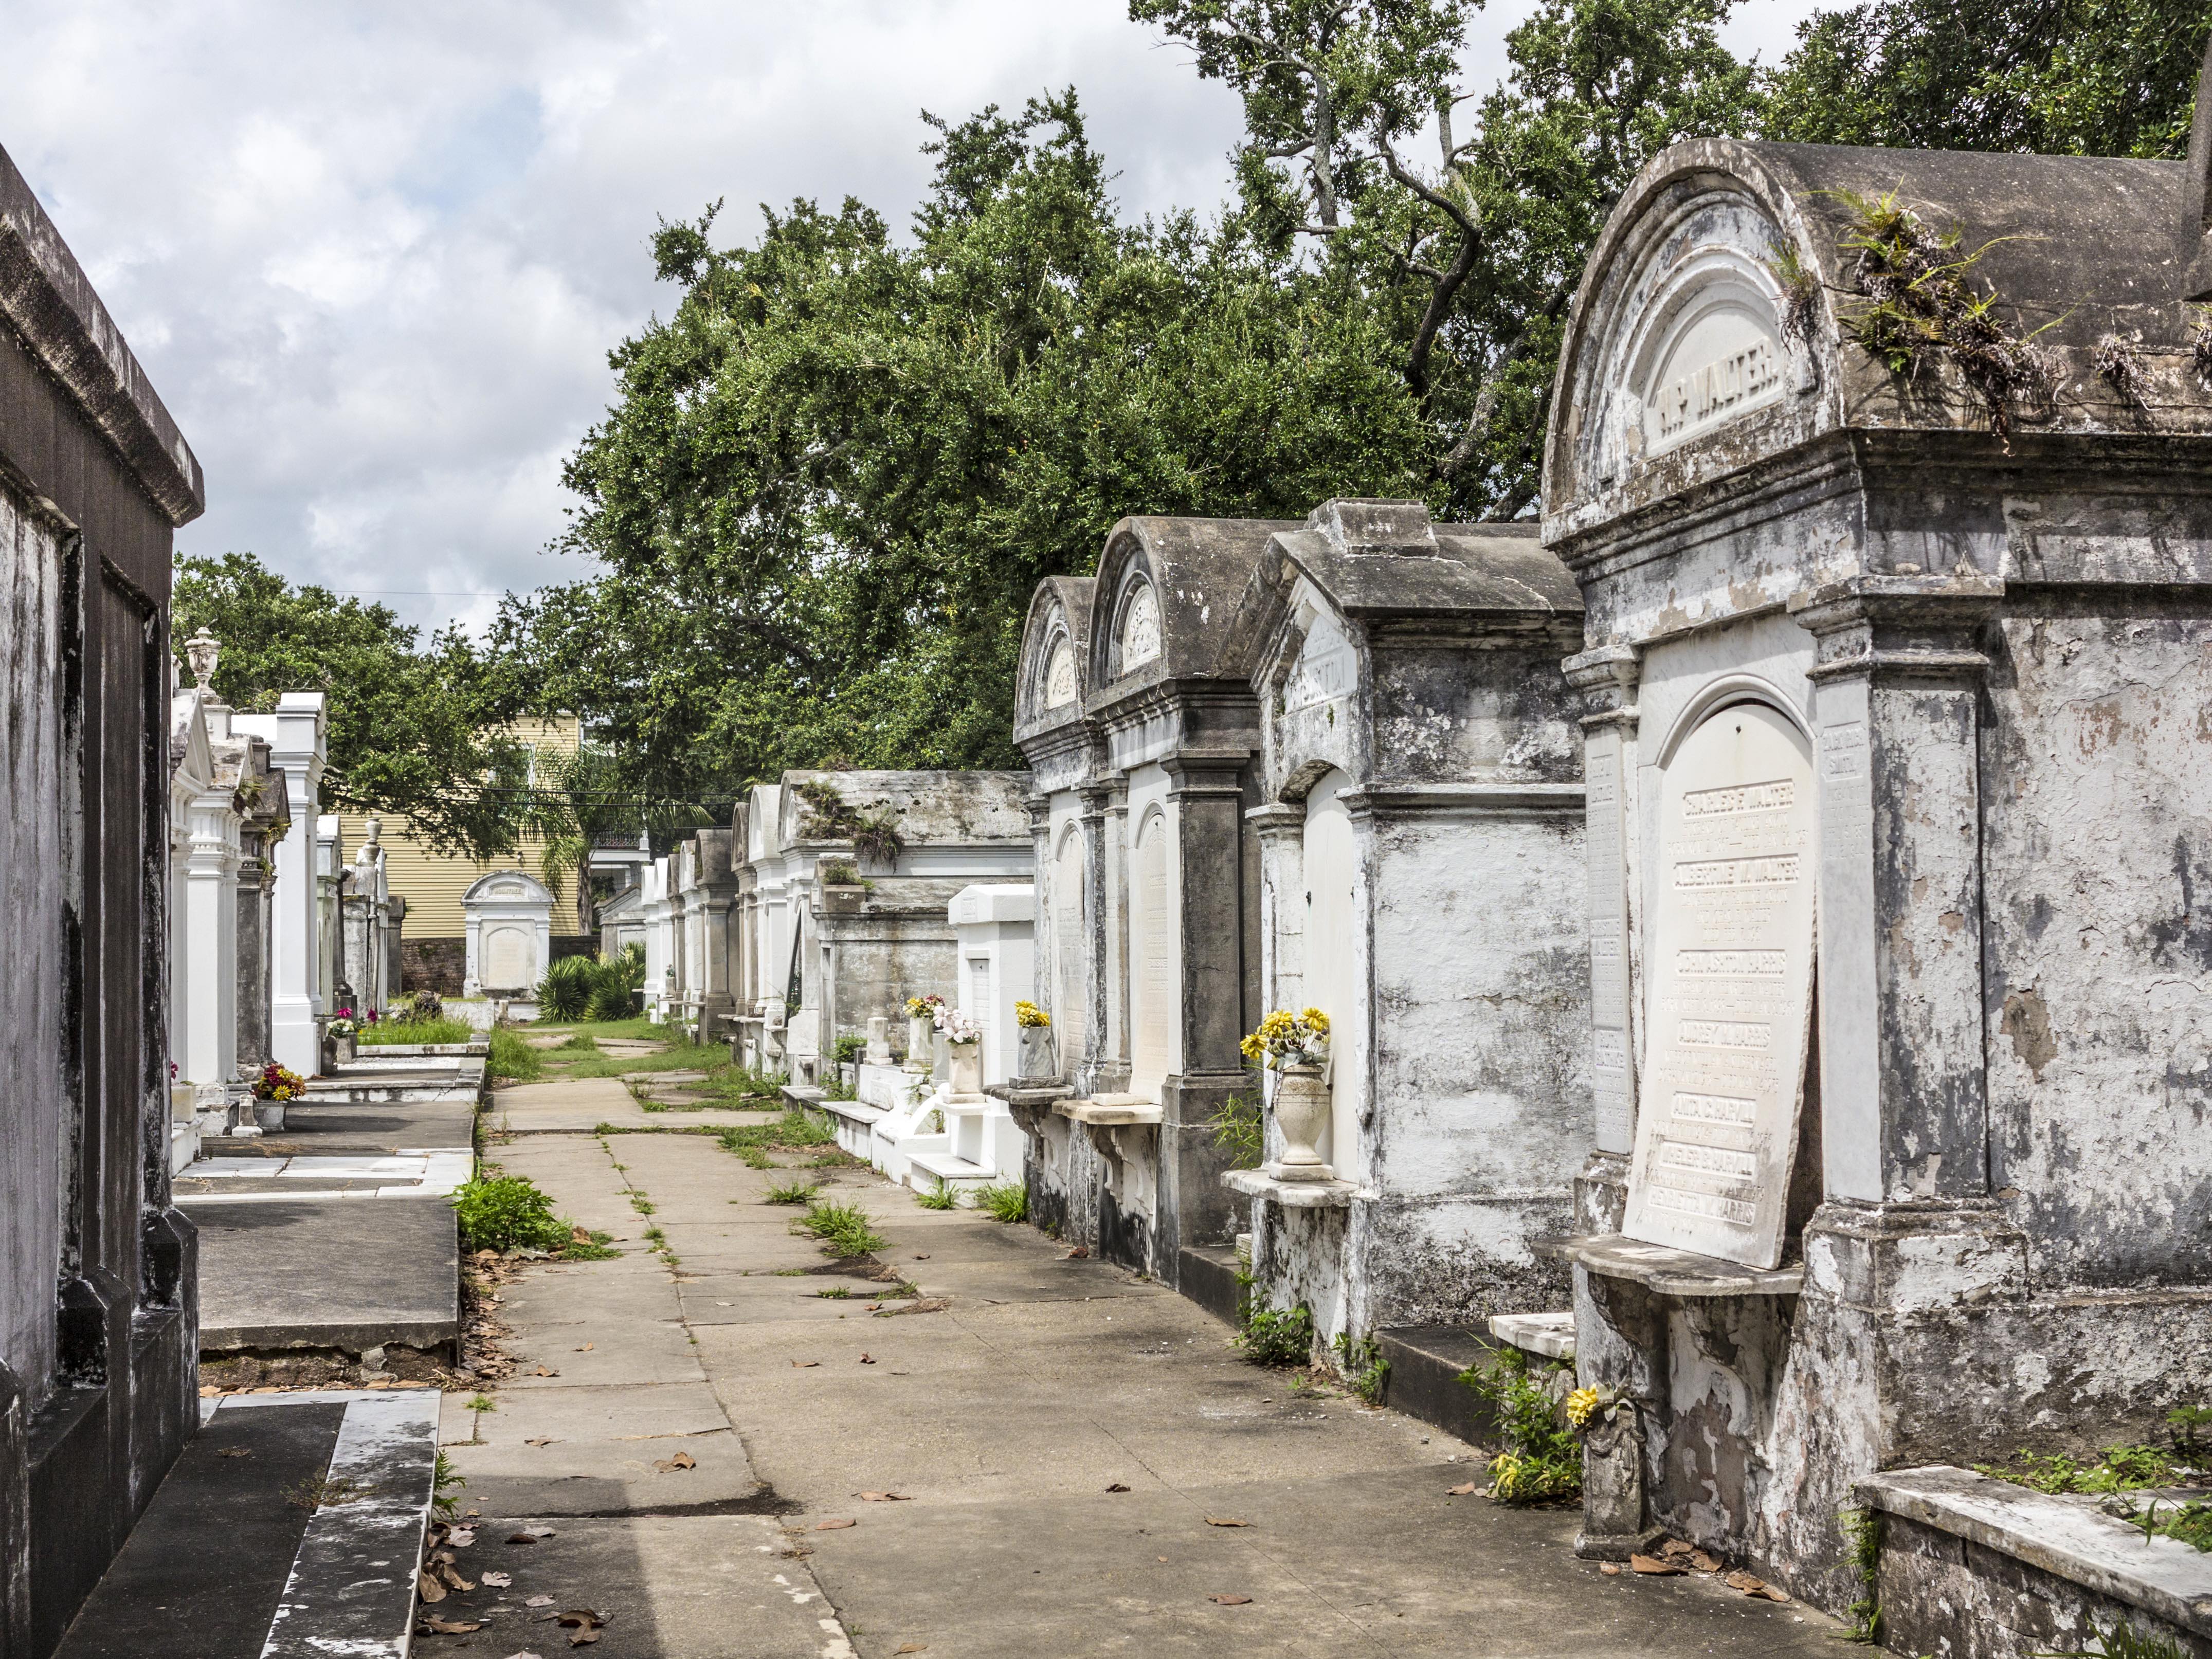 A New Orleans cemetery with above ground graves. The graves are decayed small buildings with arched roofs.